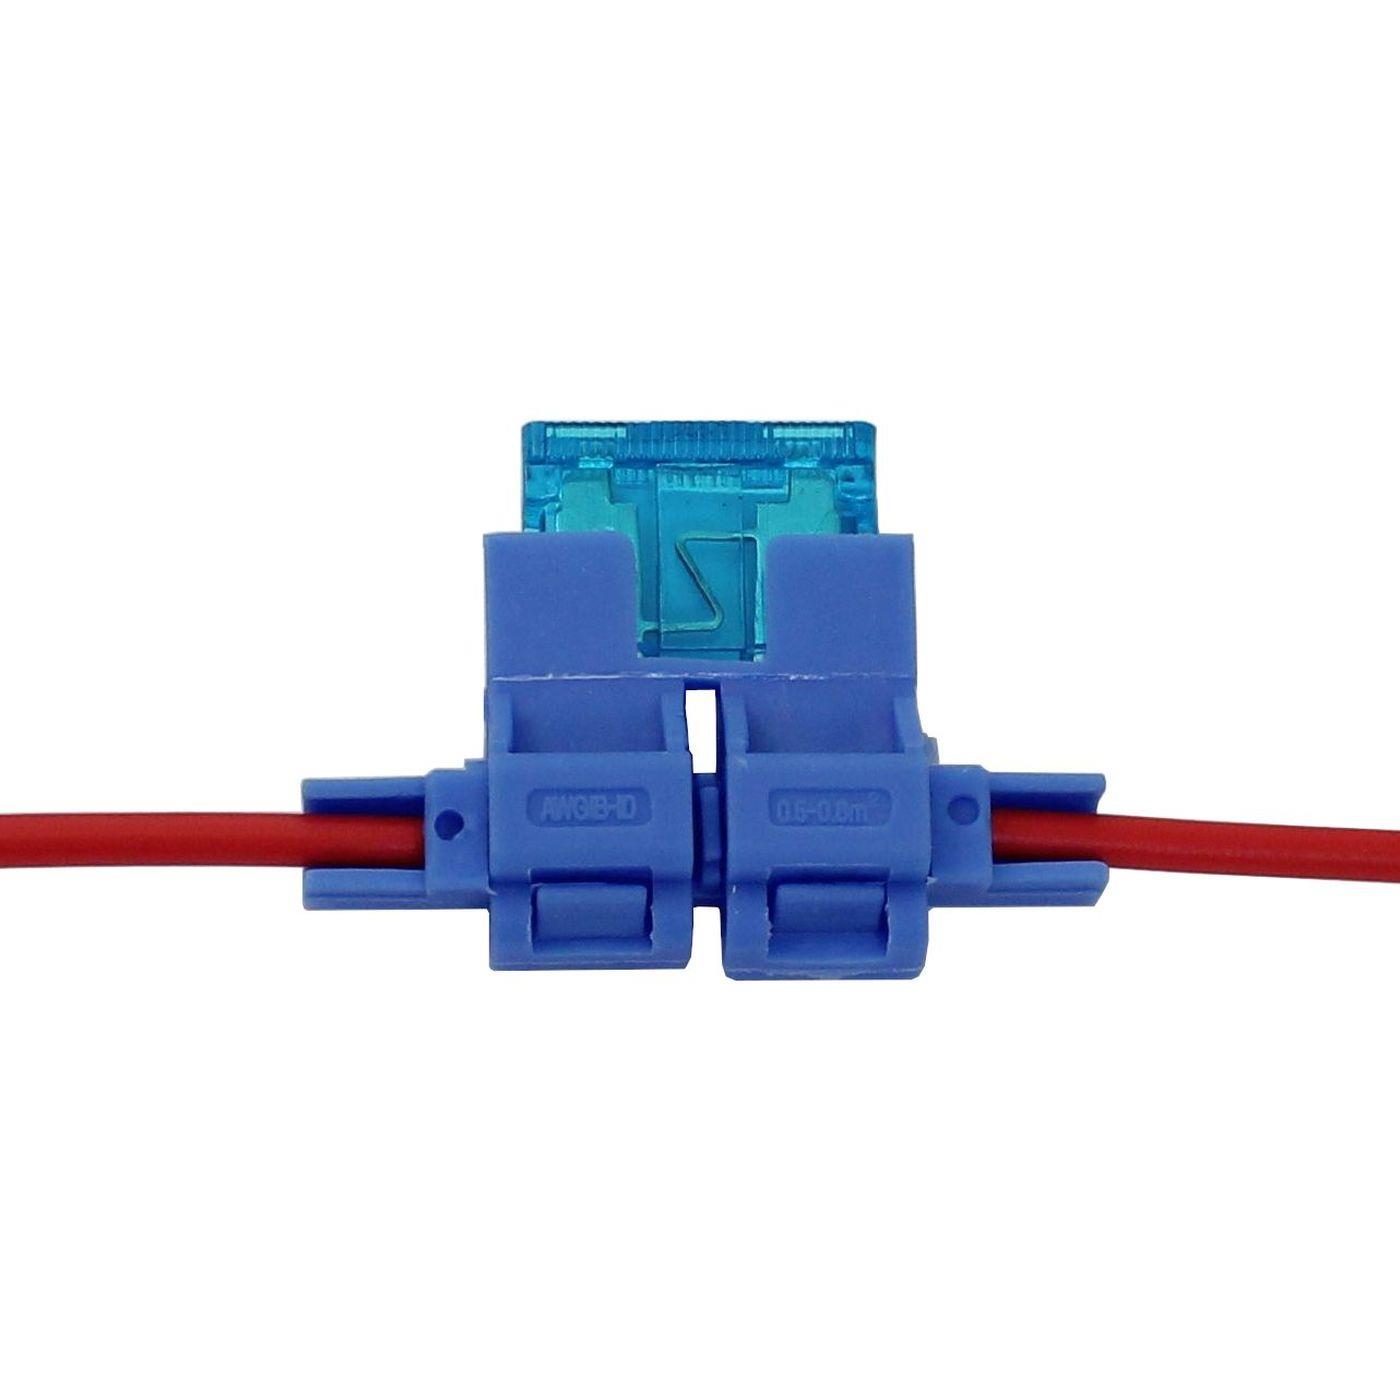 5x CAR Car Fuse holder 0,5...0,8mm² Cable cross section + 19mm 15A Flat fuse Insulation displacement technology